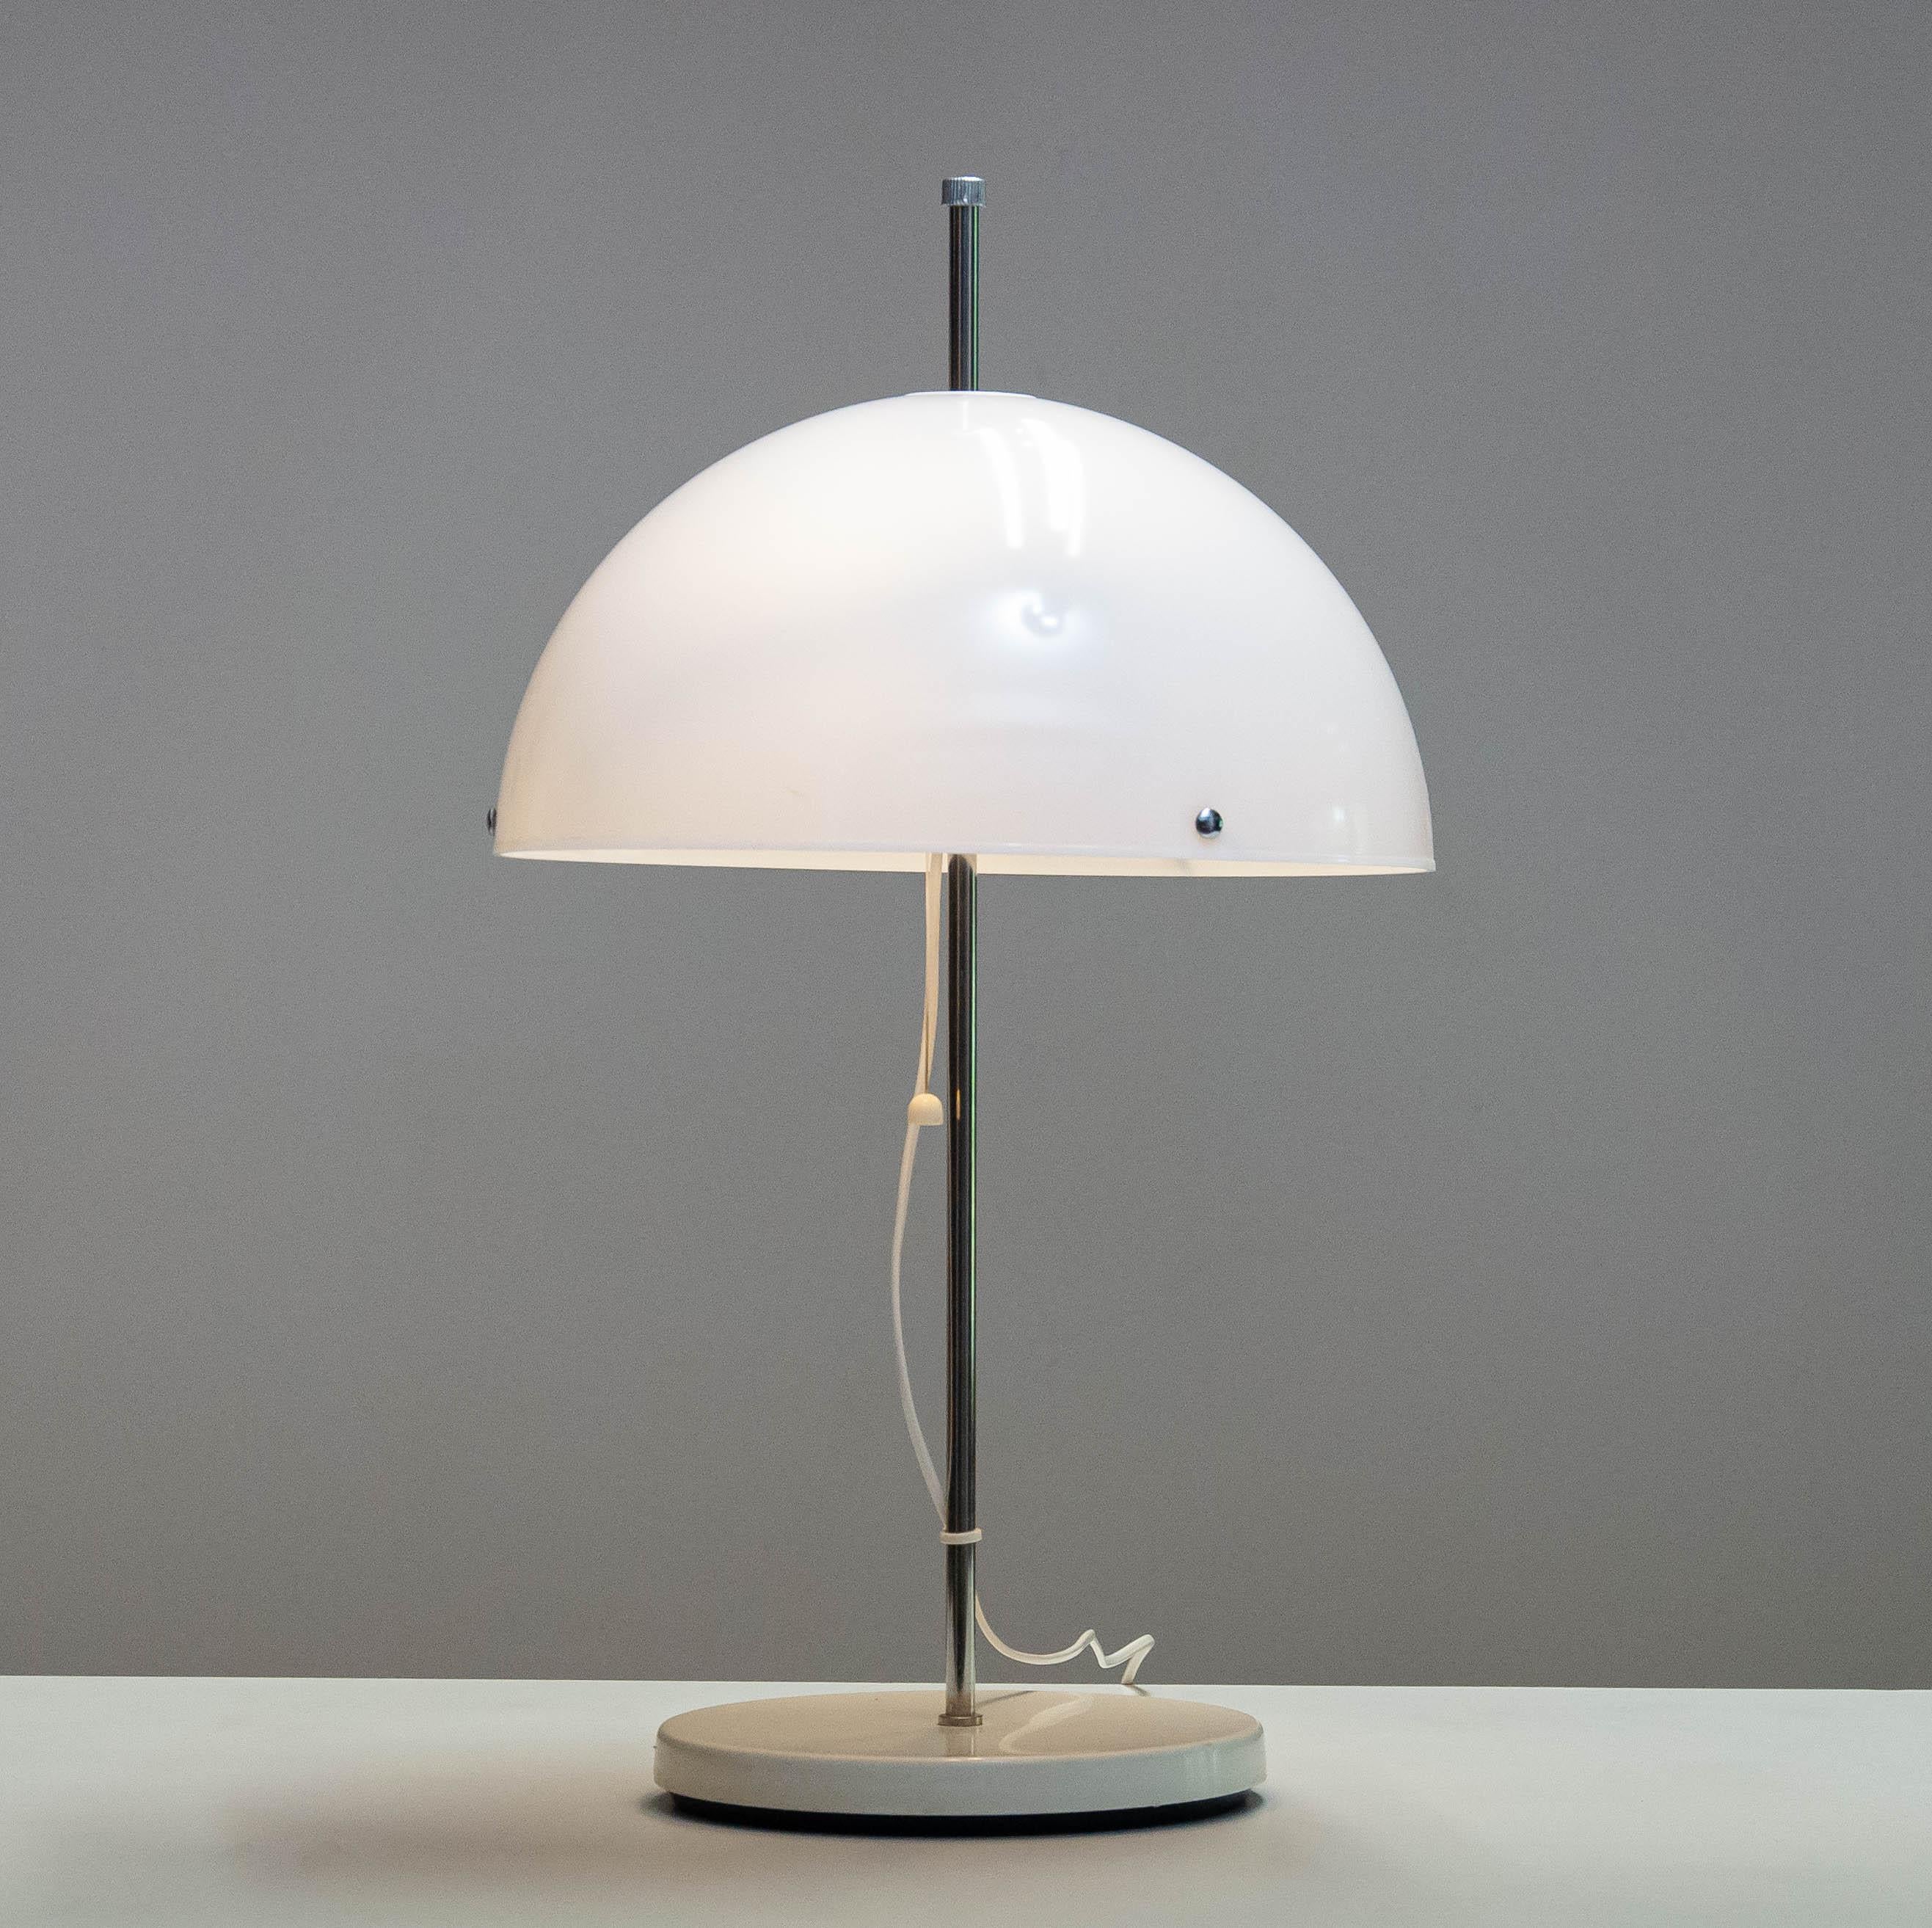 Mushroom table lamp made by Fagerhult in Belysning Sweden in the 1970's.  The acrylic shade is in allover good condition. Consists two E28 screw fittings which can be used in 110 as well as 230 volt areas.
The shade is adjustable in height.
Allover